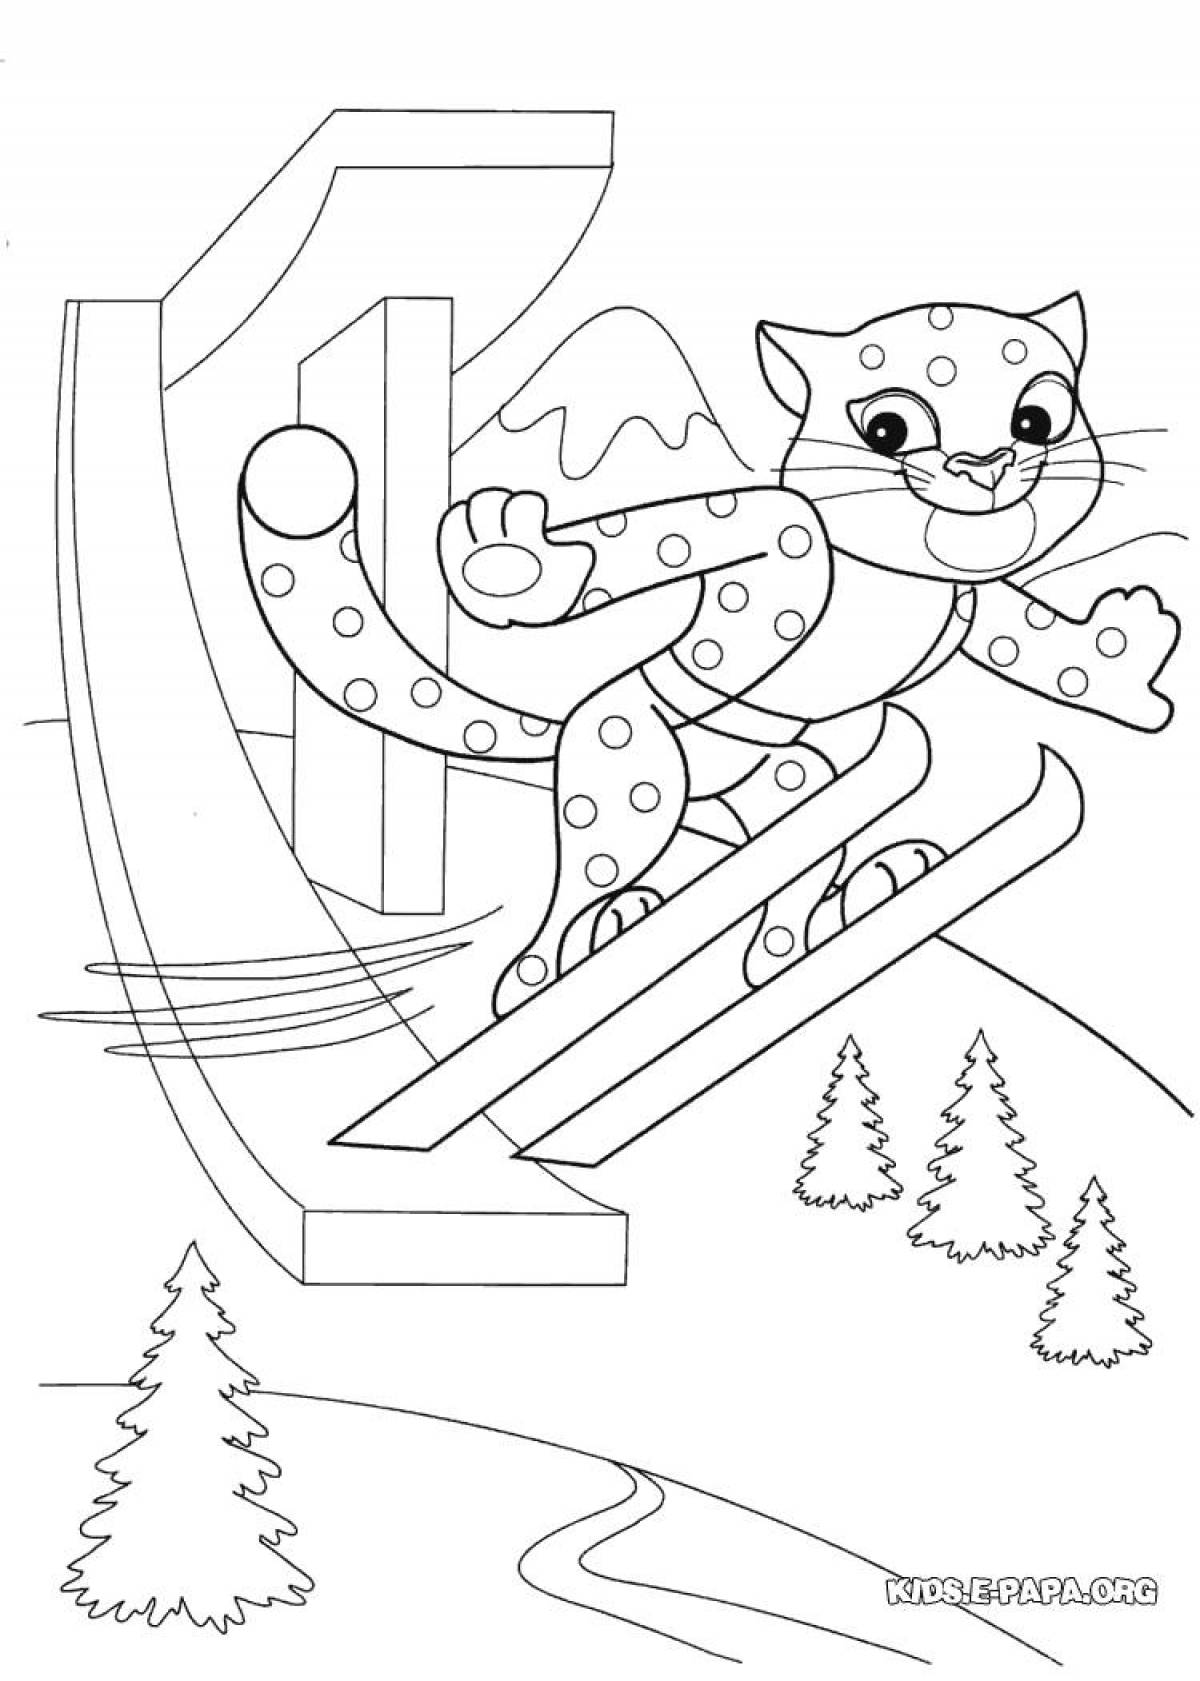 Wonderful coloring book winter sports for children 6-7 years old